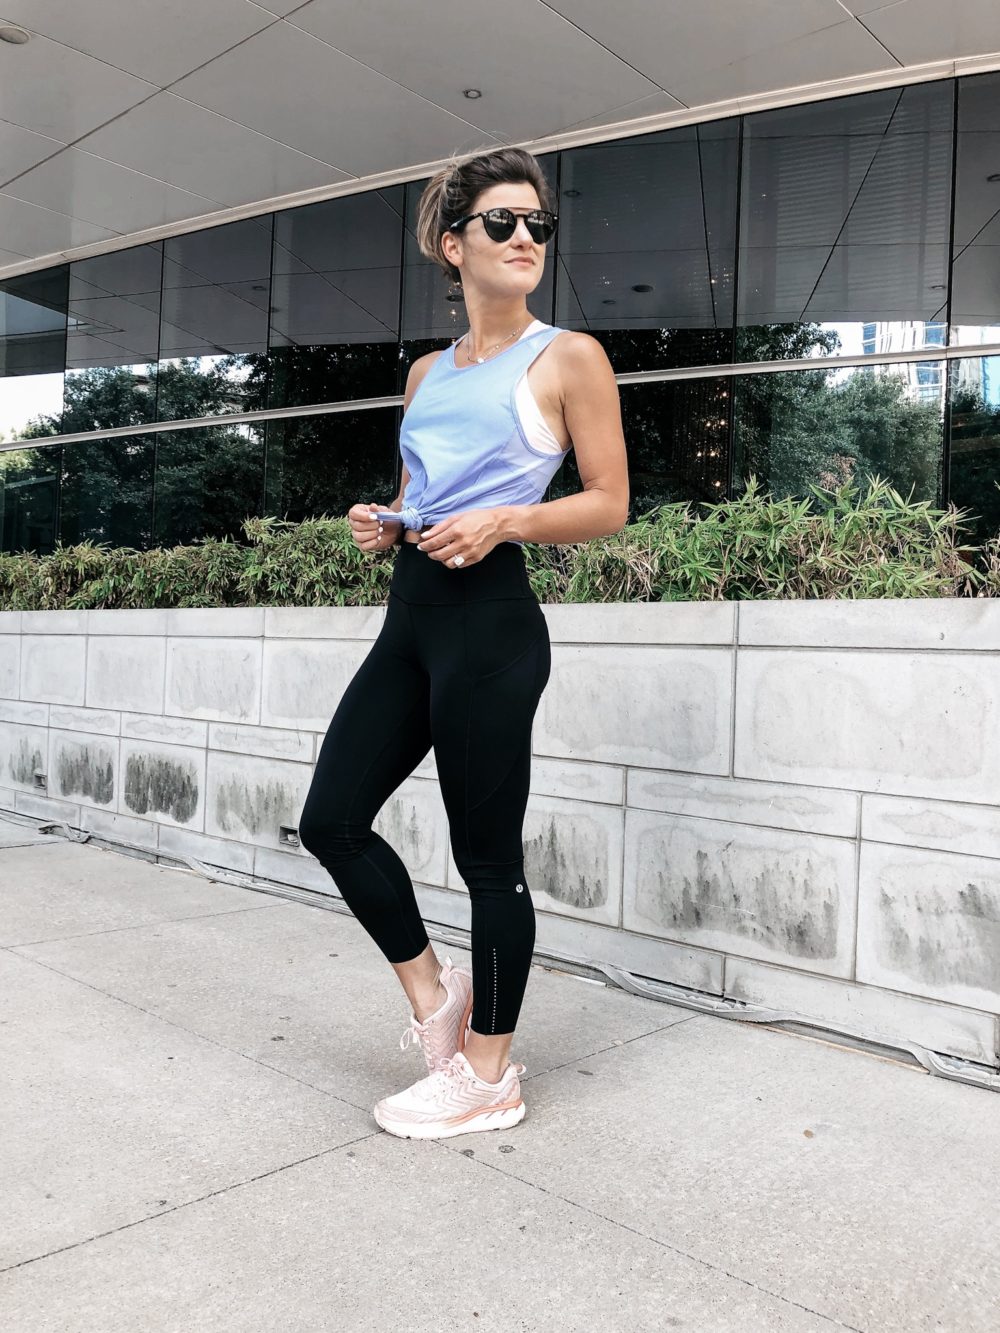 brighton keller wearing lululemon energy bra with fast and free leggings and sculpt tank II, fitness outfit